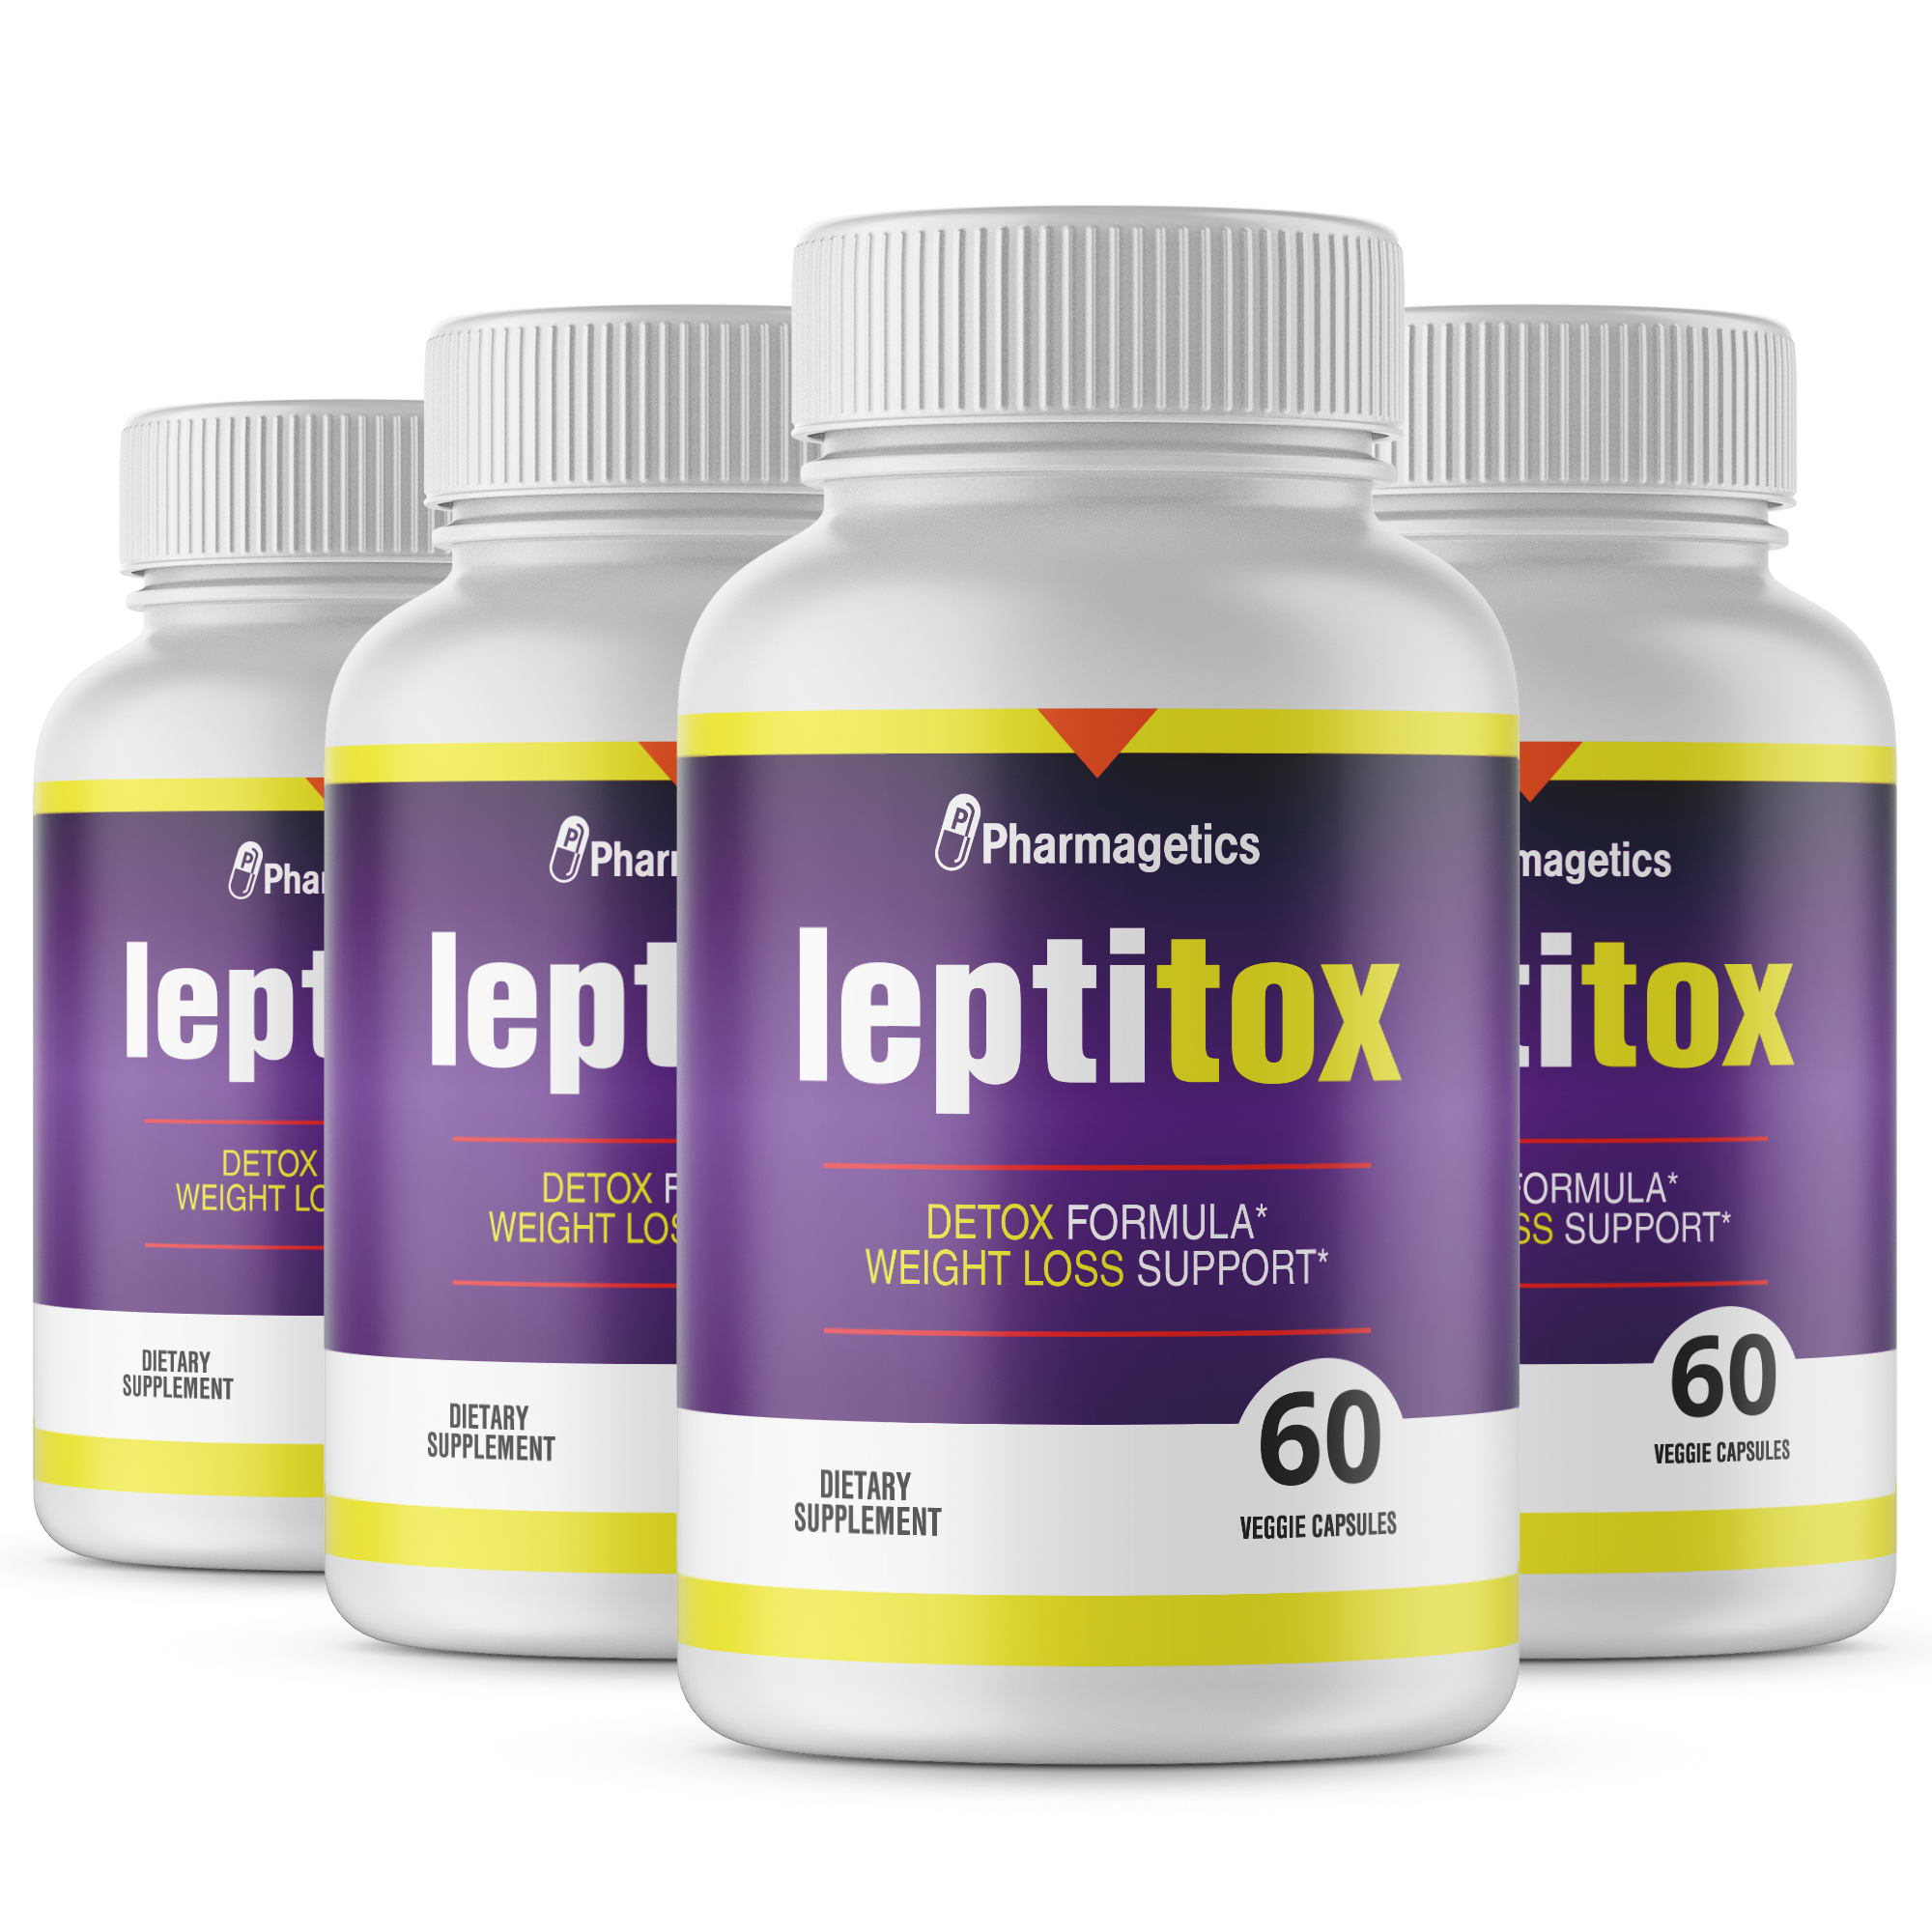 Leptitox Detox Formula  Weight Loss Support 60 Capsules, 4 Bottles